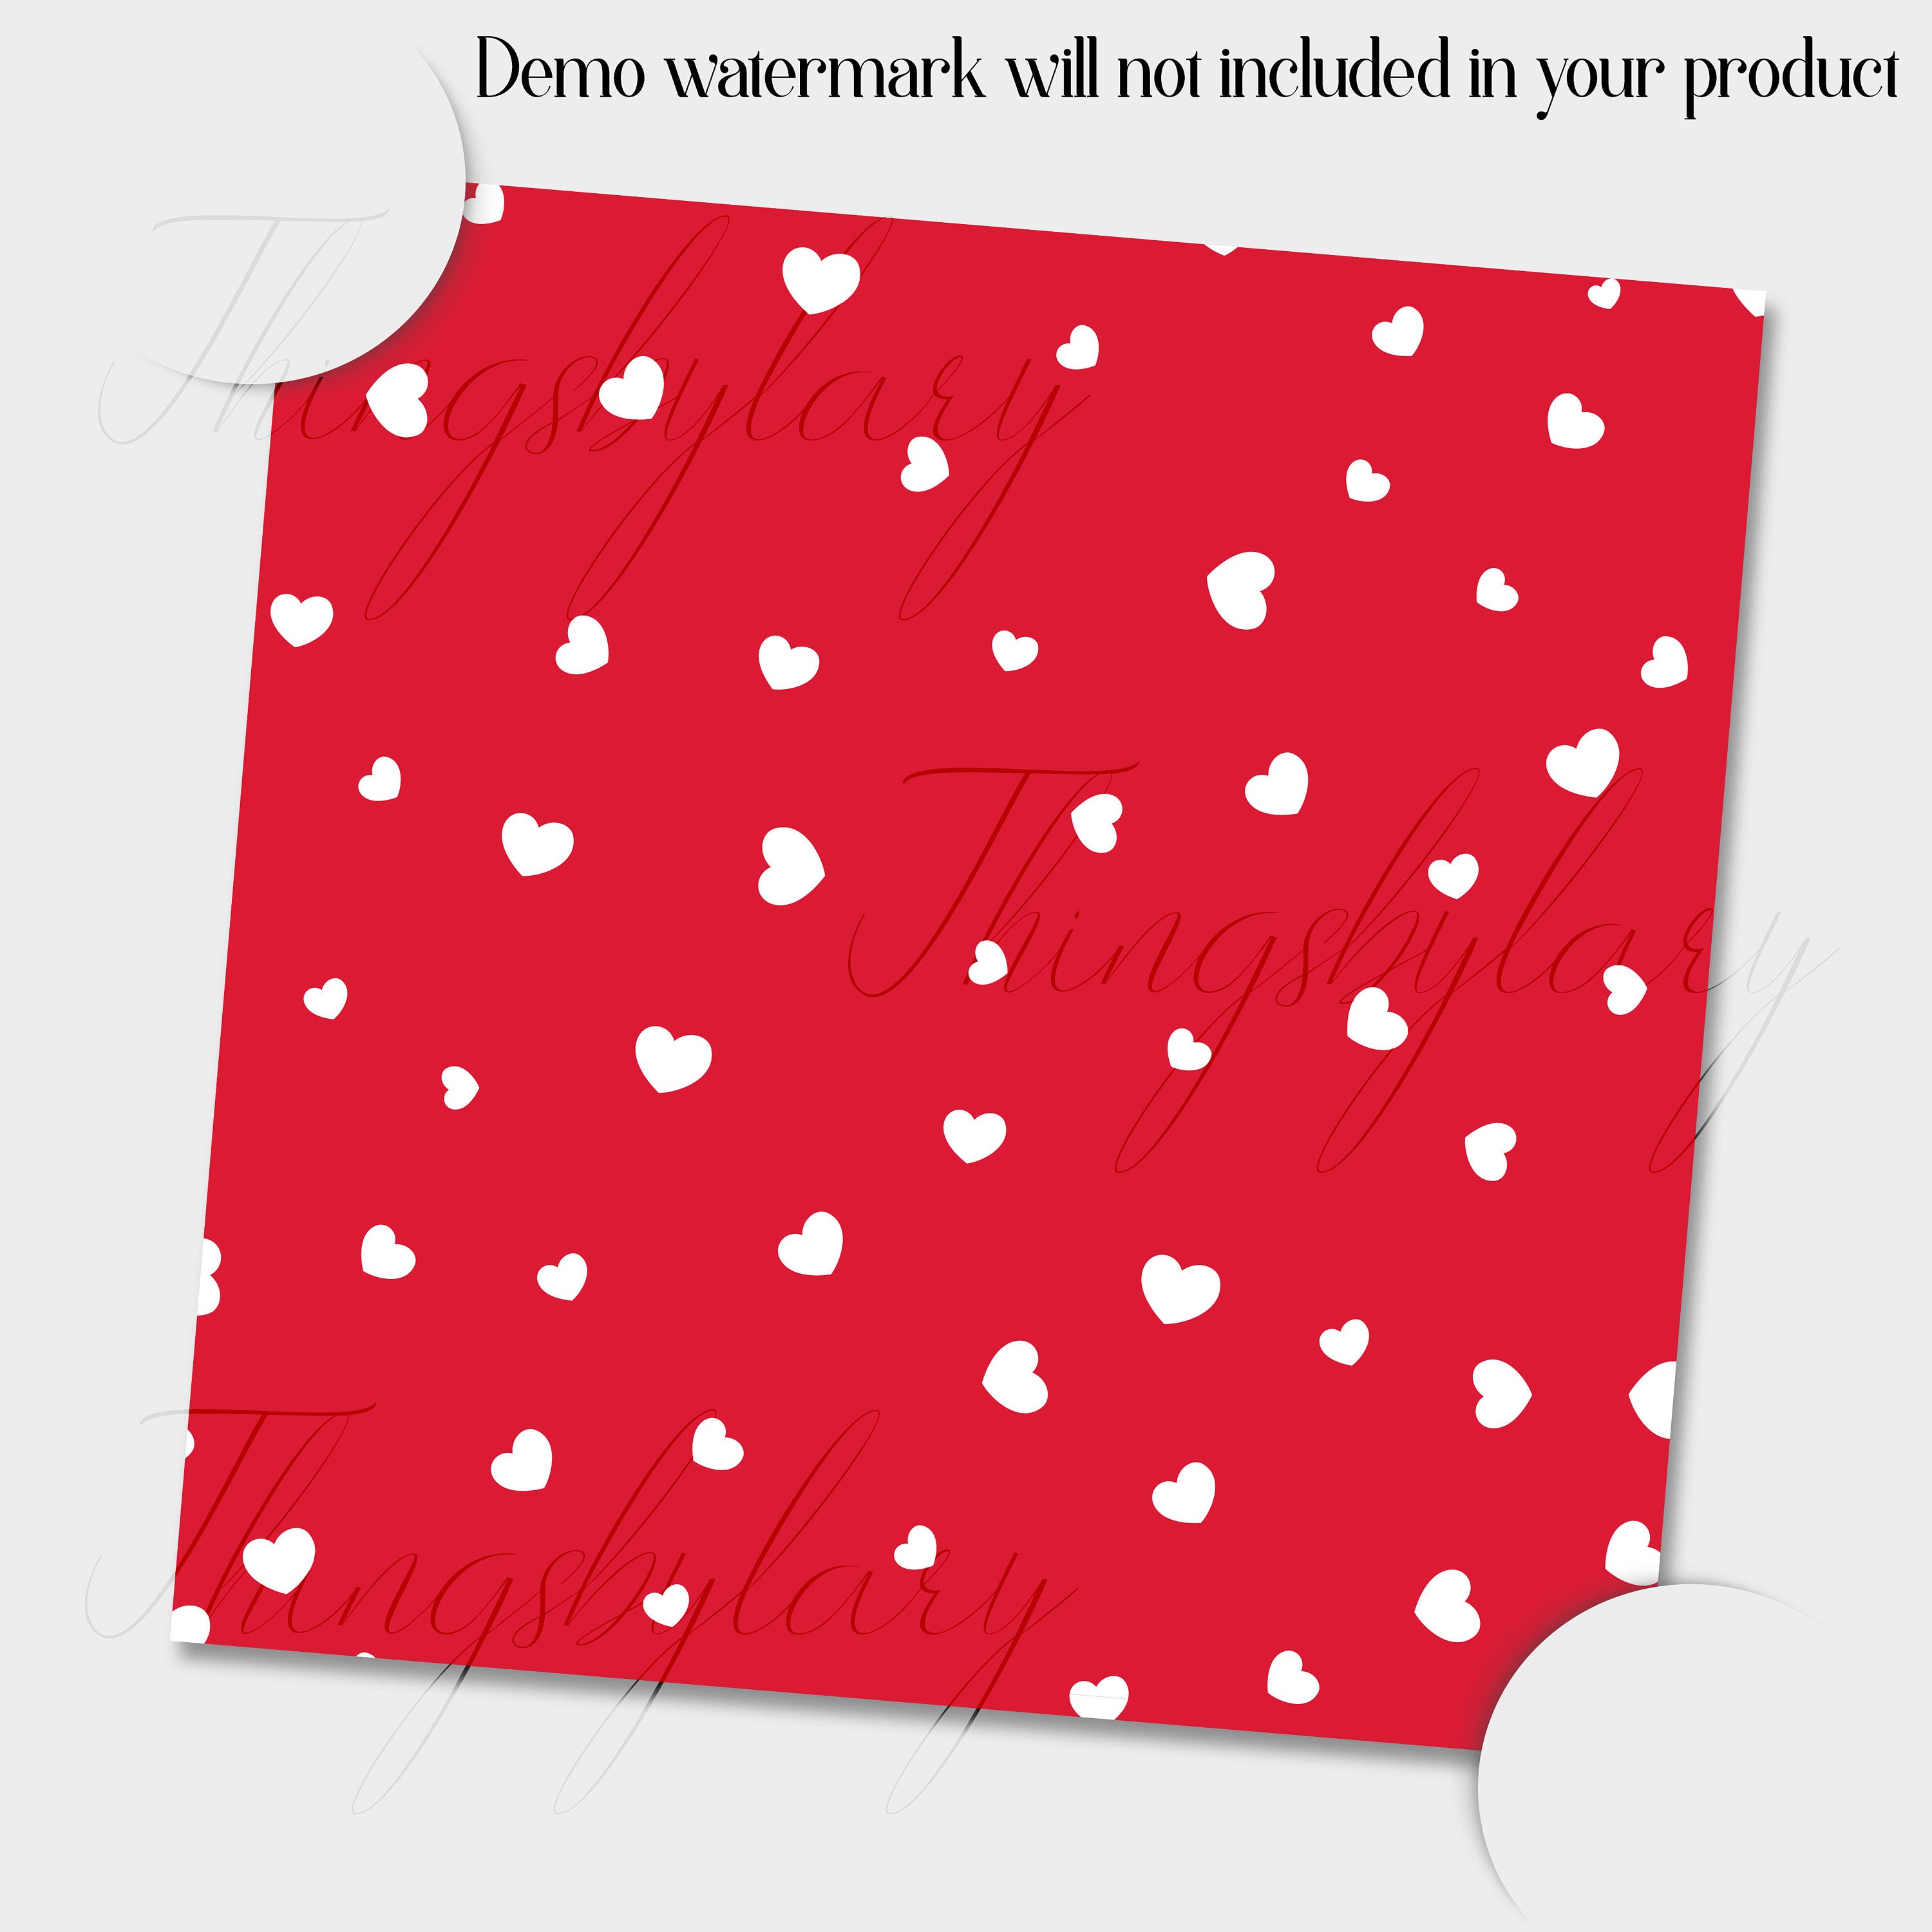 100 Seamless Falling Small Heart Digital Papers 12 x 12 inch 300 Dpi Planner Papers Commercial Use Scrapbook Papers Valentine Love Wedding